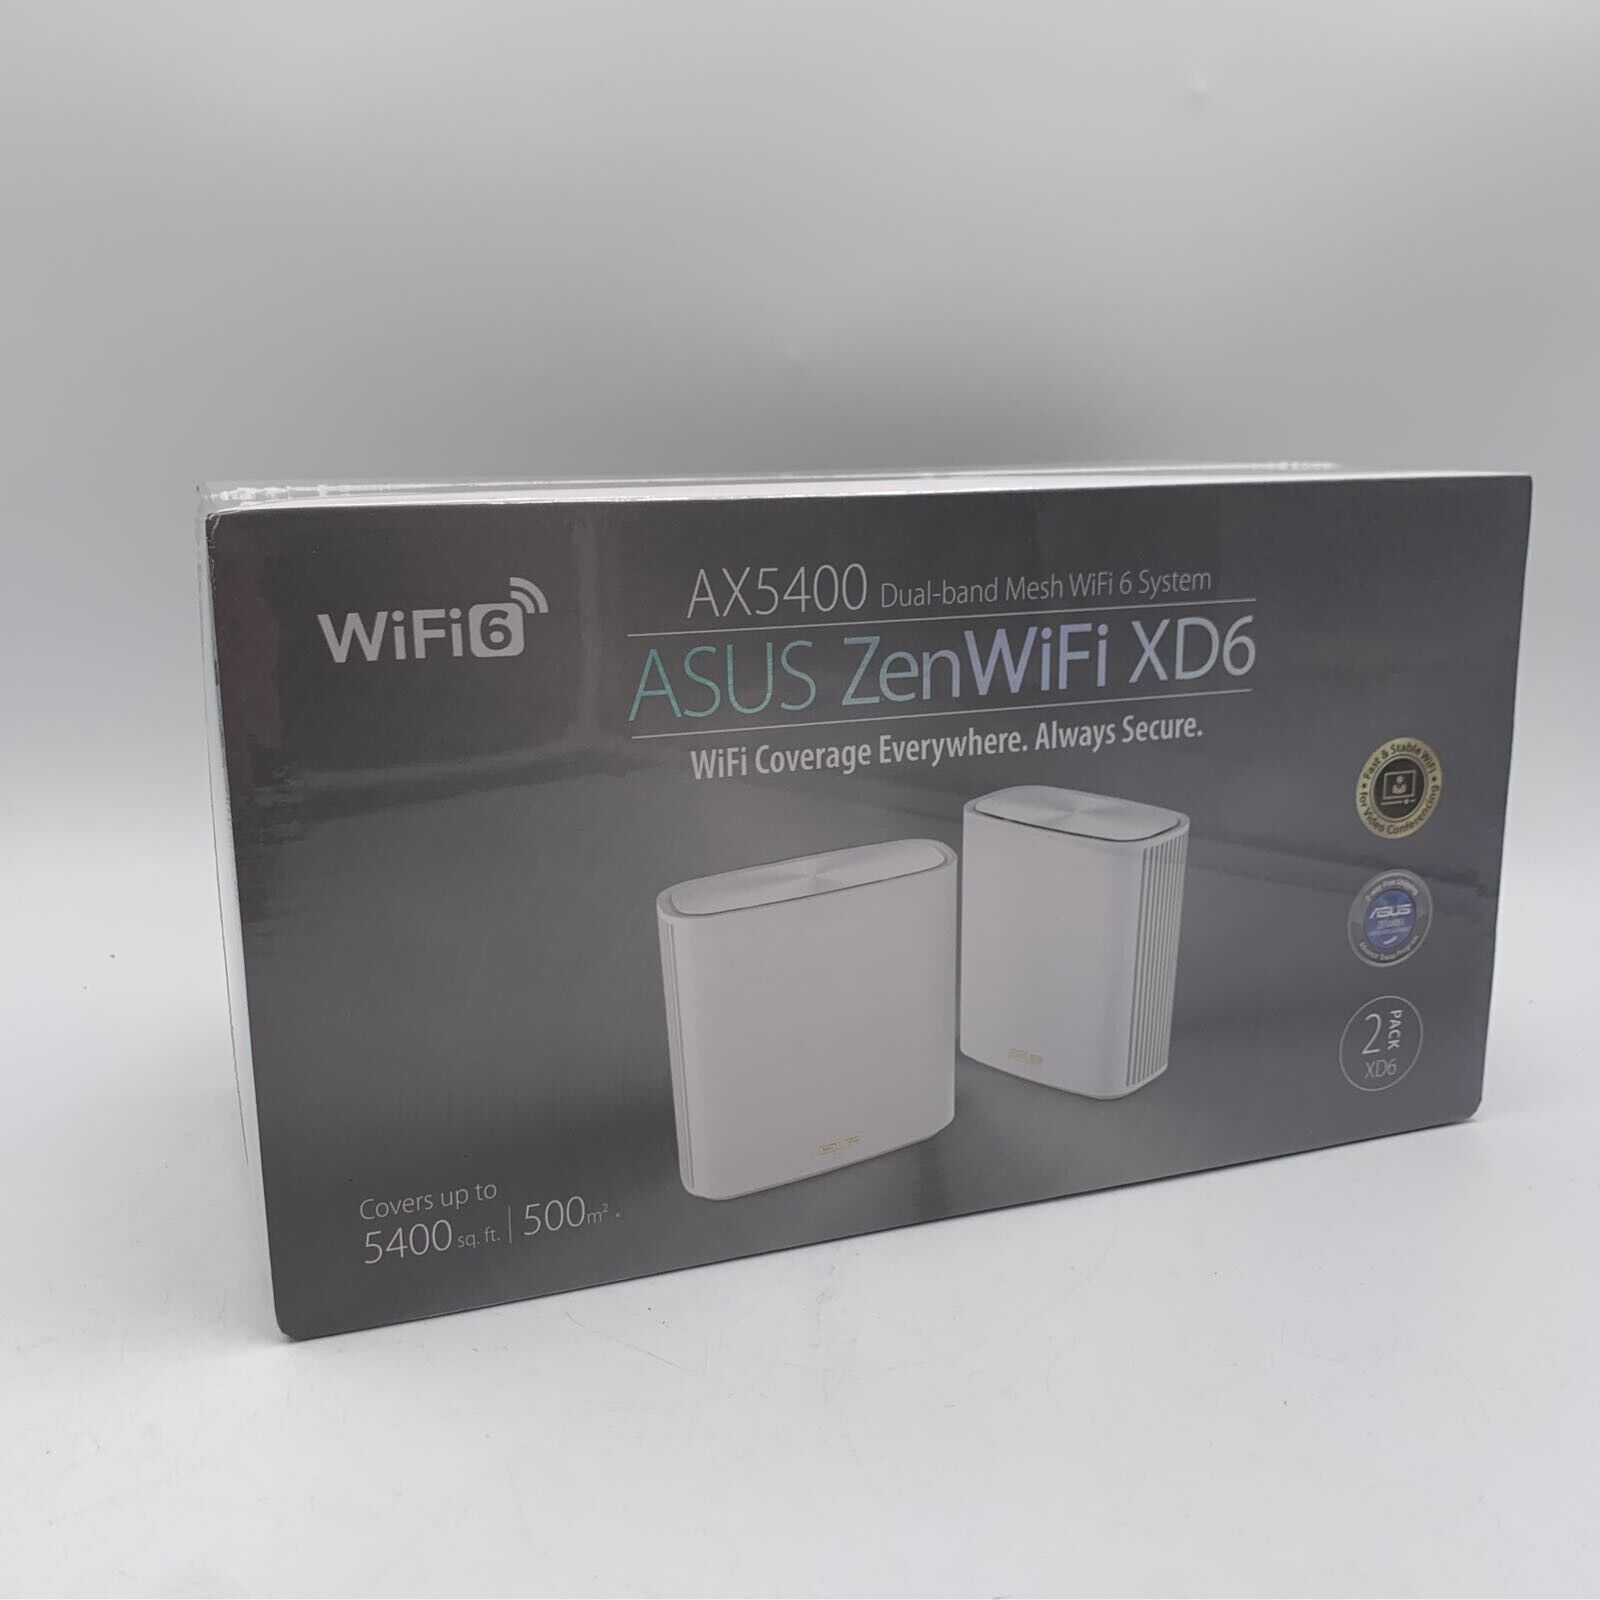 ASUS ZenWiFi XD6 AX5400 Dual-Band WiFi 6 Whole-Home Mesh System White - (2-Pack)